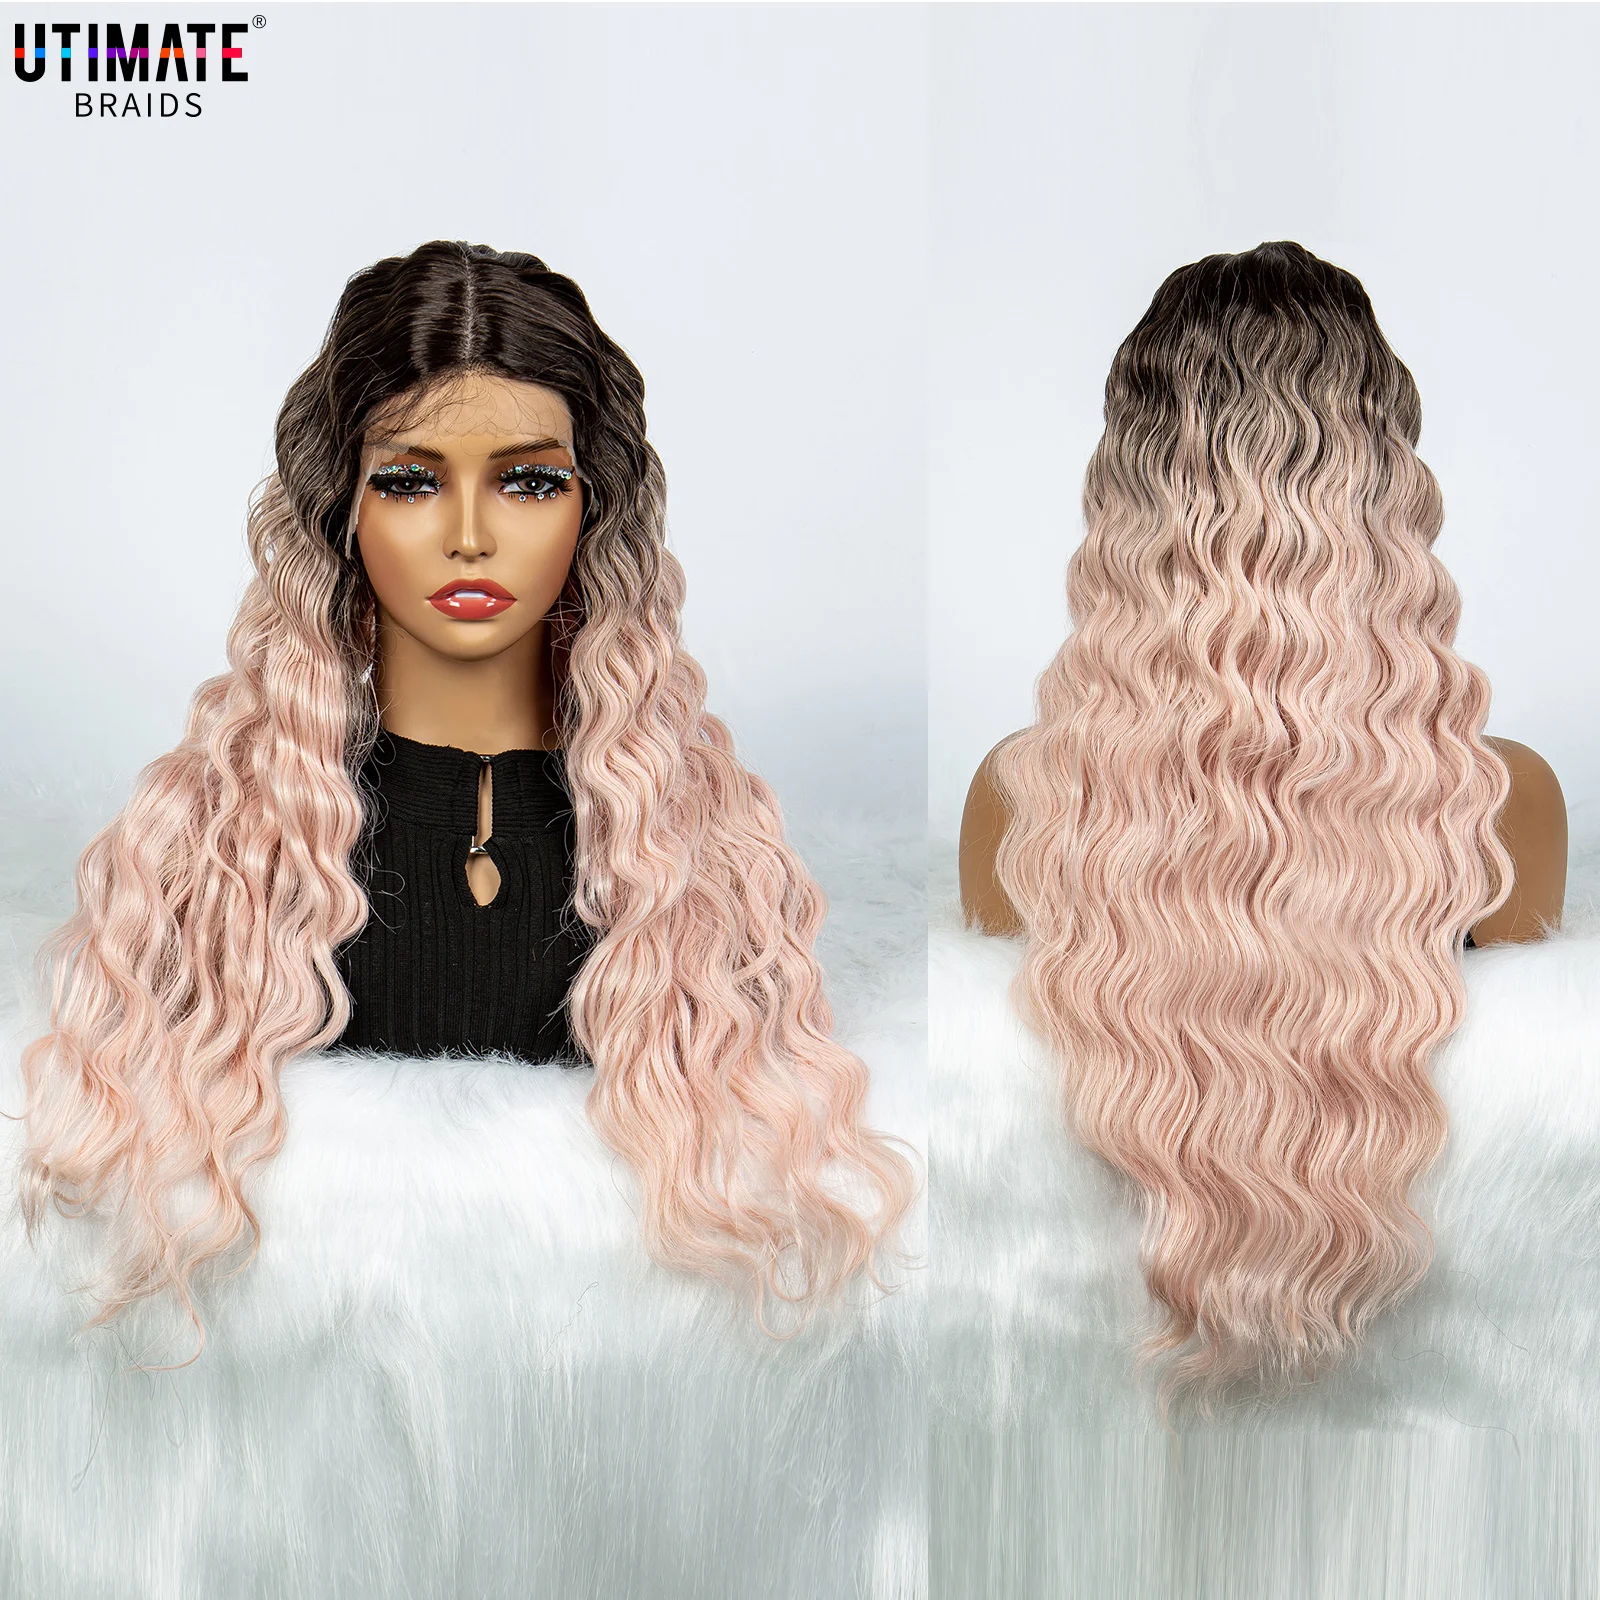 

Pink Wig for Women Long Ombre Black to Pink Wavy Curly Synthetic Wigs with Bangs Middle Part Dark Roots Layered Hair with Bangs